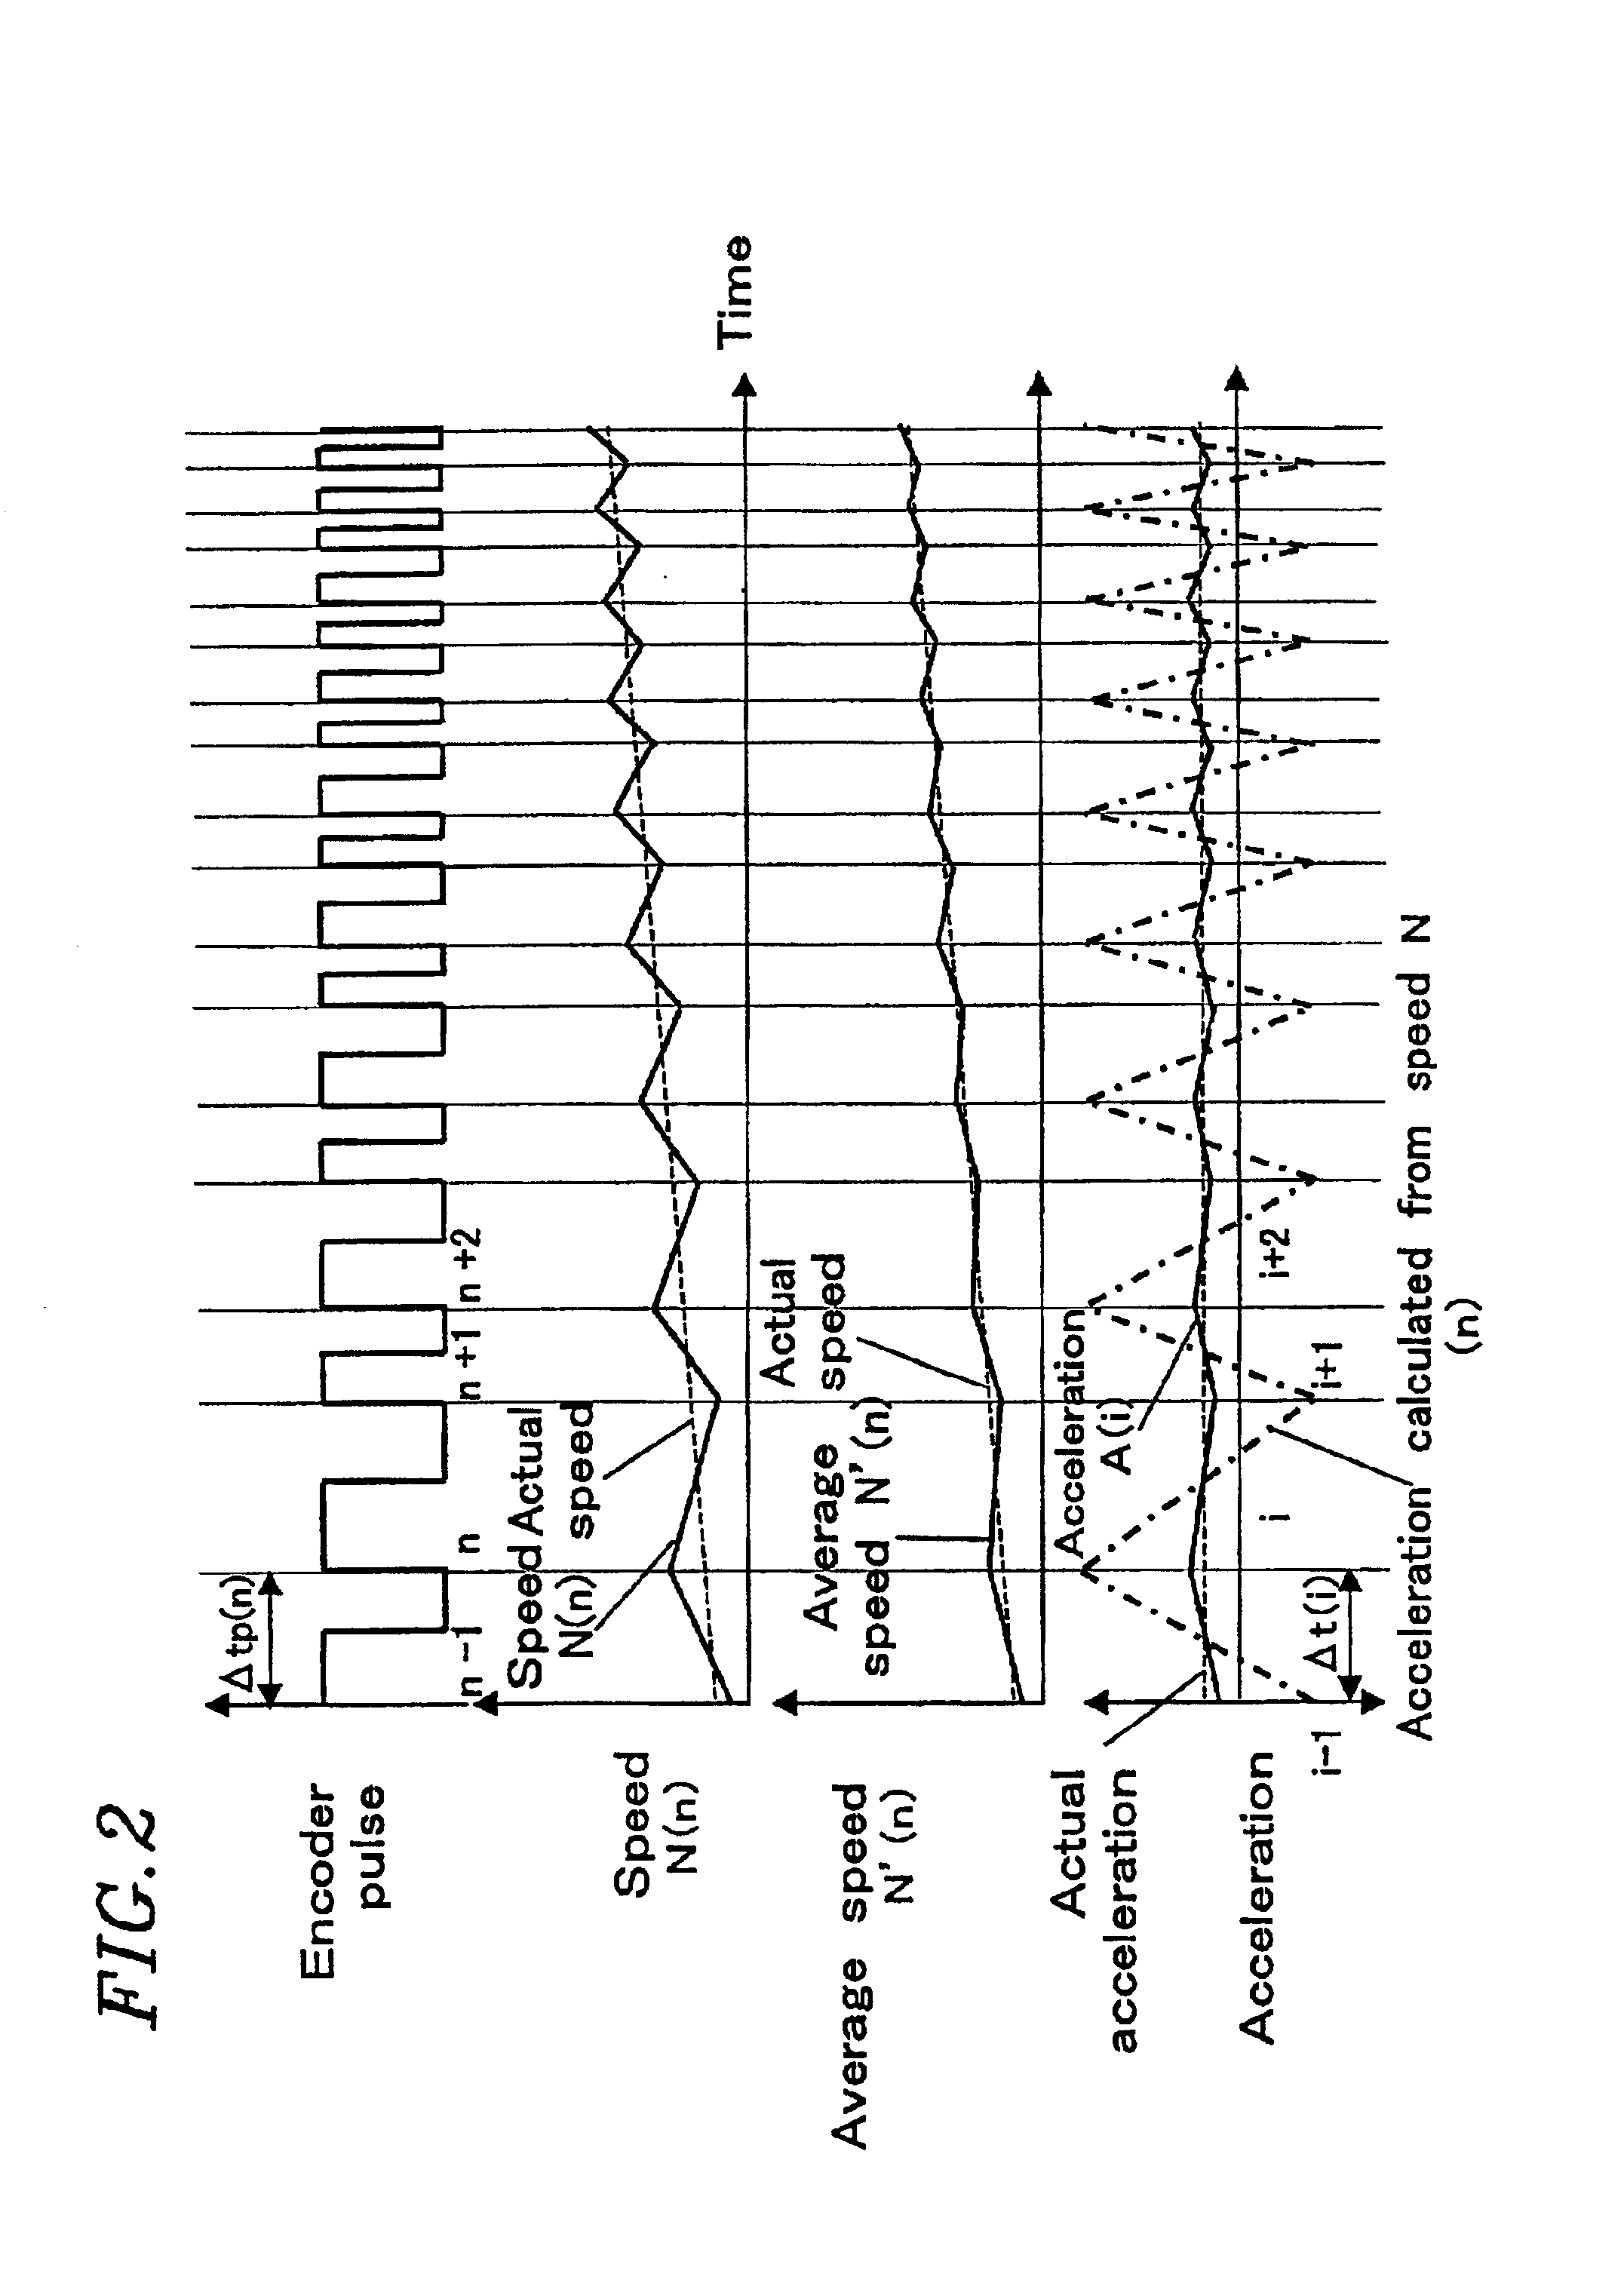 Motor control apparatus, disk apparatus and acceleration detection device